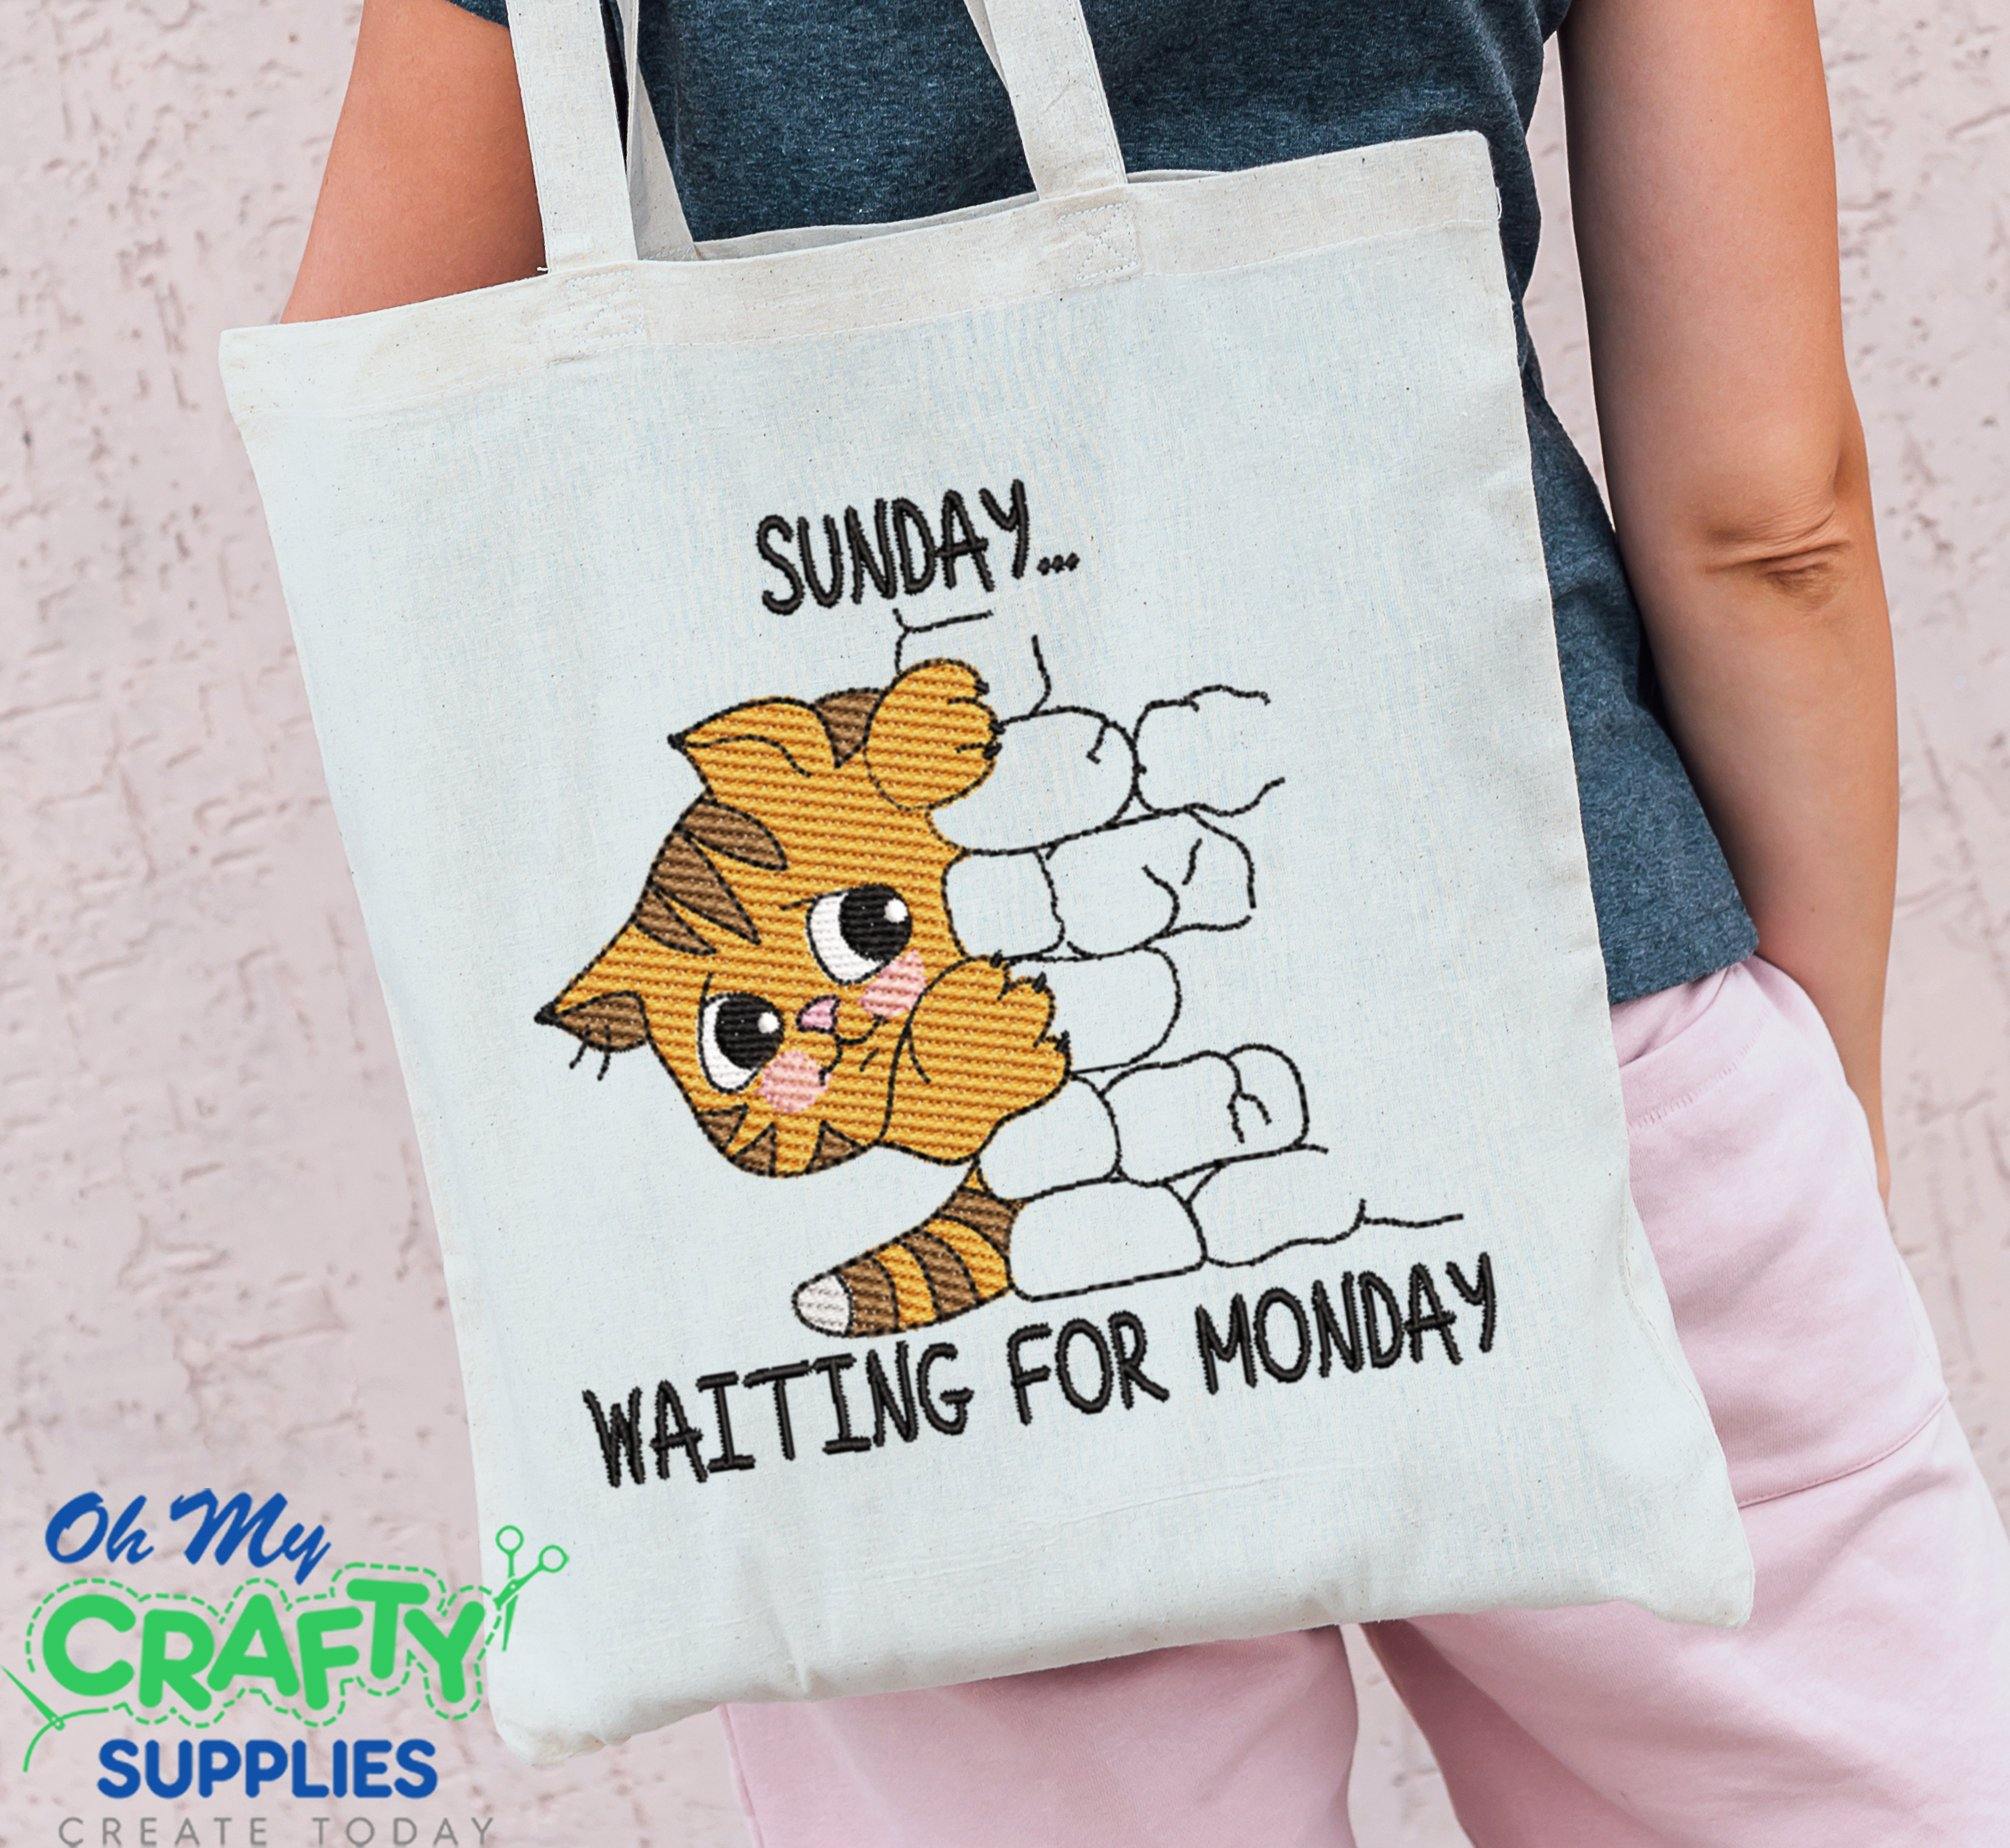 Sunday Waiting on Monday Sketch Cat Embroidery Design - Oh My Crafty Supplies Inc.